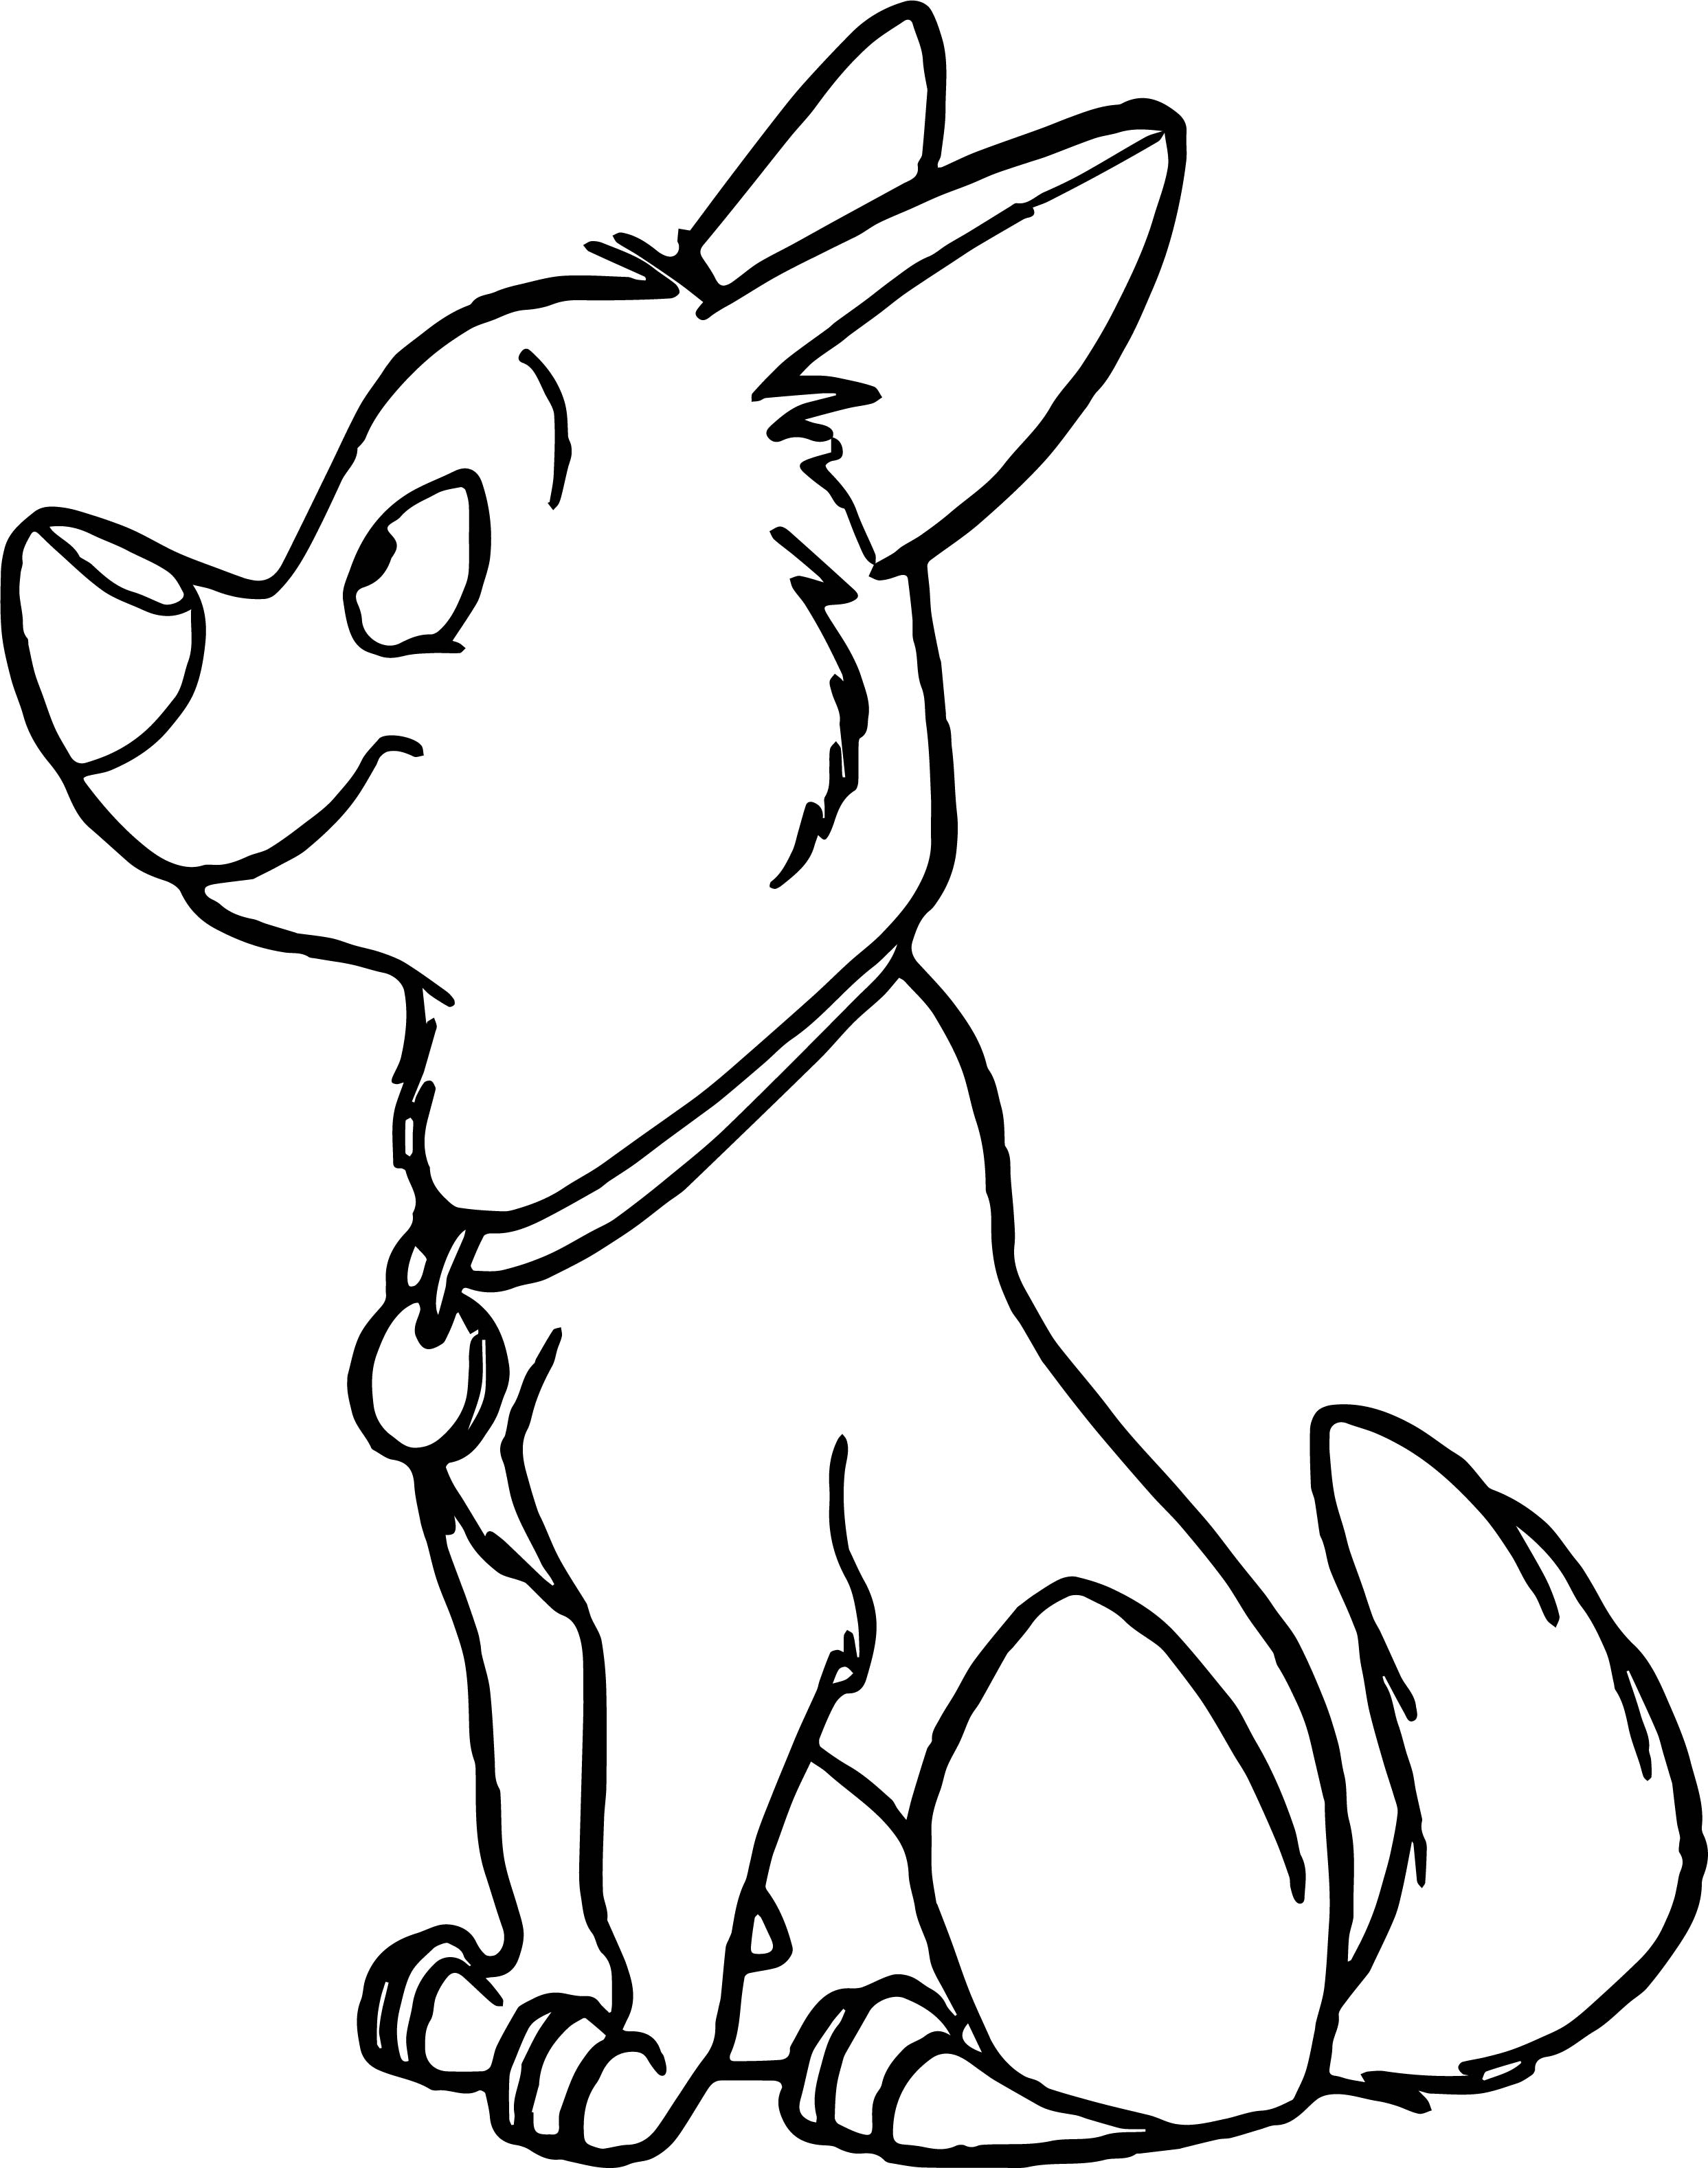 Bolt Coloring Pages - Best Coloring Pages For Kids